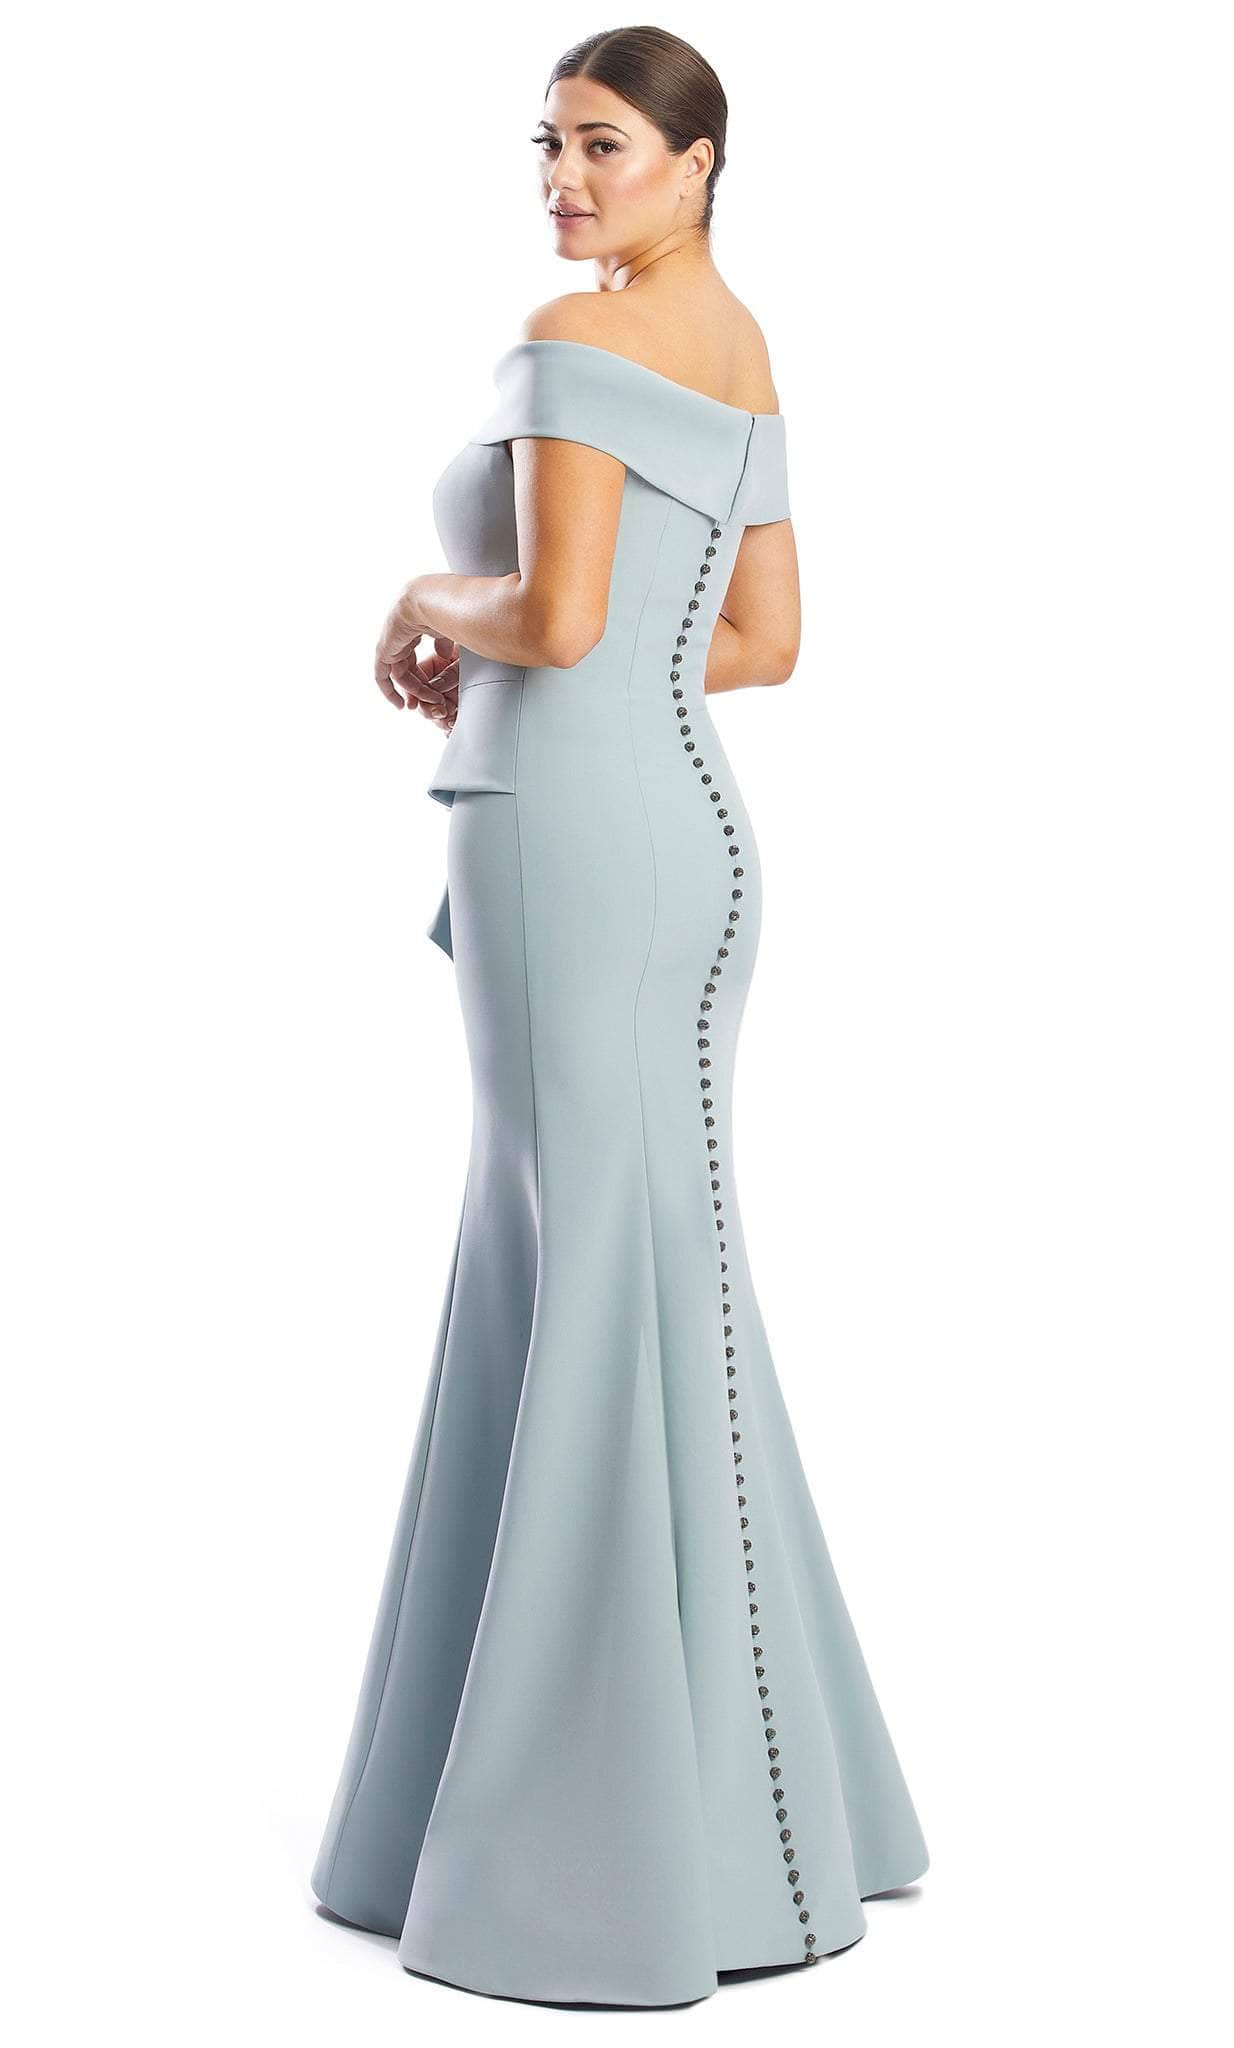 Alexander by Daymor 1756S23 - Minimalistic Off Shoulder Gown Evening Dresses